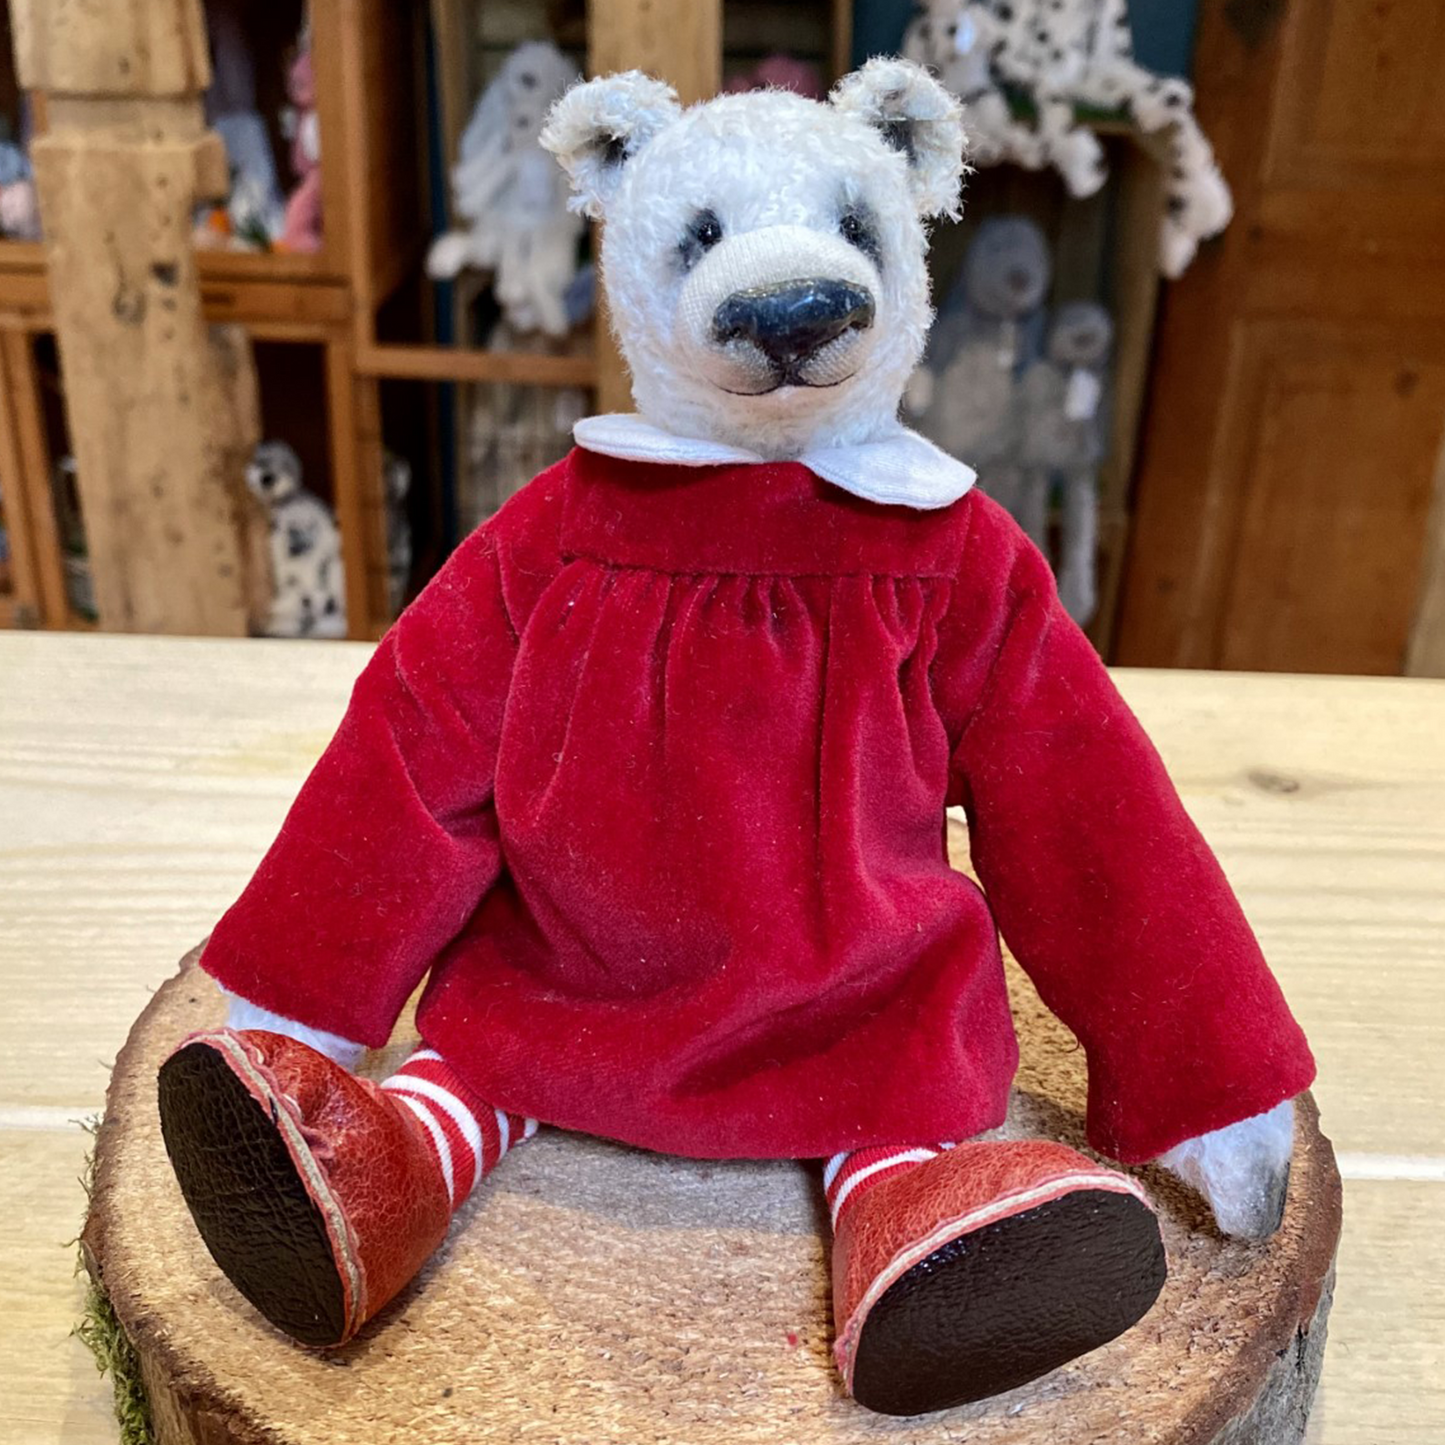 Samantha Salter-Rafferty is from West Sussex, and hand-makes the most outstanding and beautiful bears and animals full of character. Each one is made with viscose and sawdust, and is lovingly dressed with style and precision.  You can't miss Angela's lovely red and white stripy socks which matches her red cord smock dress and red shoes perfectly!